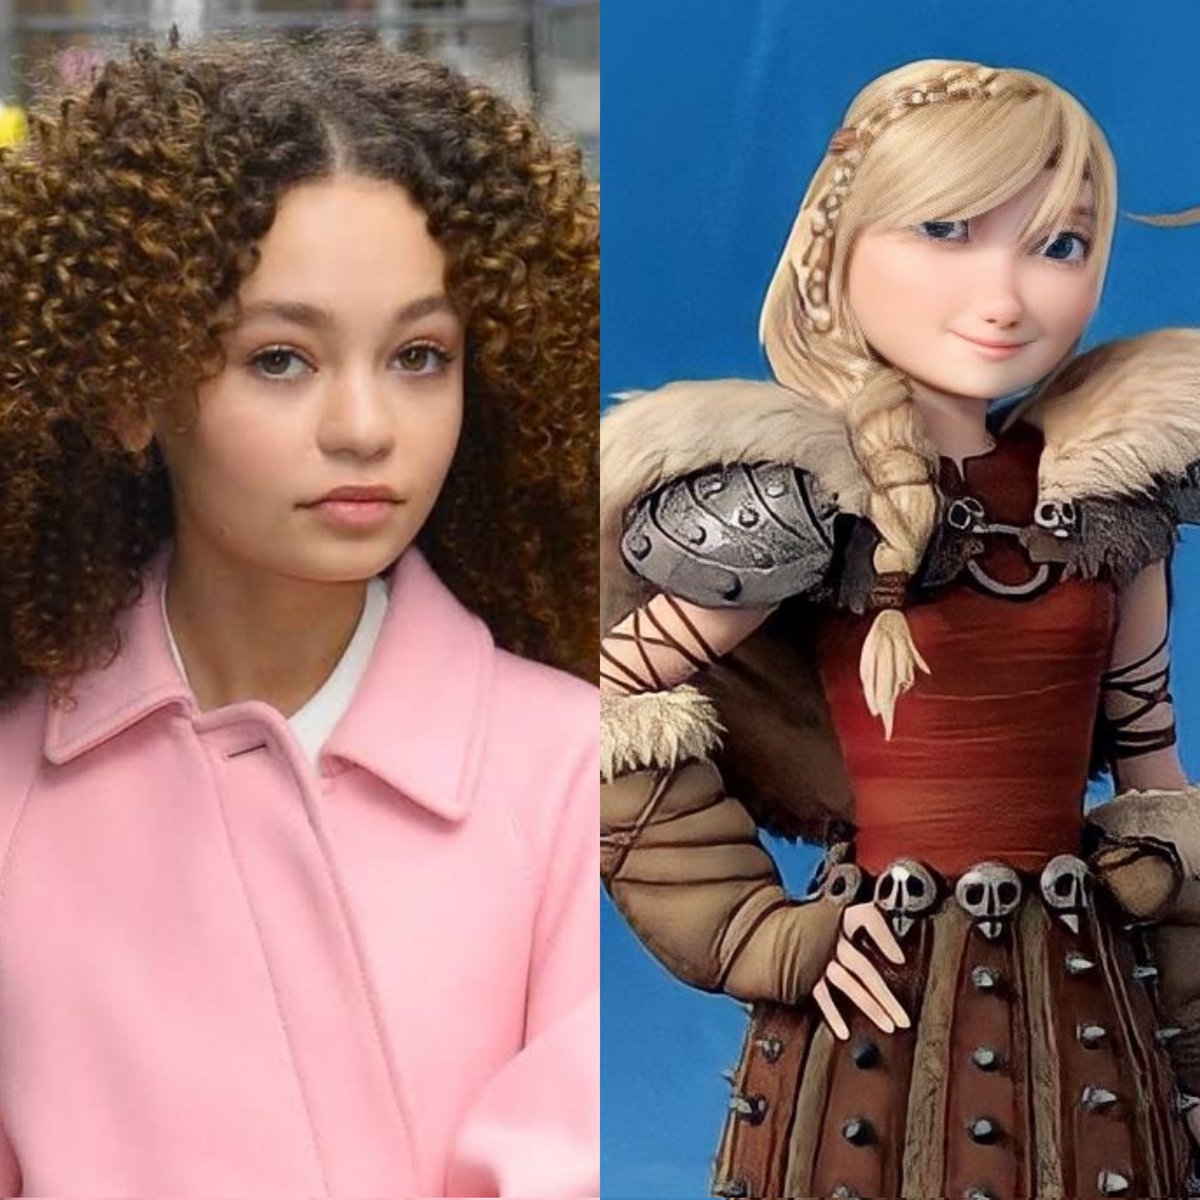 So… let me get this straight, it is NOT acceptable that a Non-jewish man takes the role of a jewish characters, but it IS acceptable for a mixed girl to take the role of a norwish blonde girl?

Hmmm… I don't think I get it… 

#NicoParker #HowToTrainYourDragon